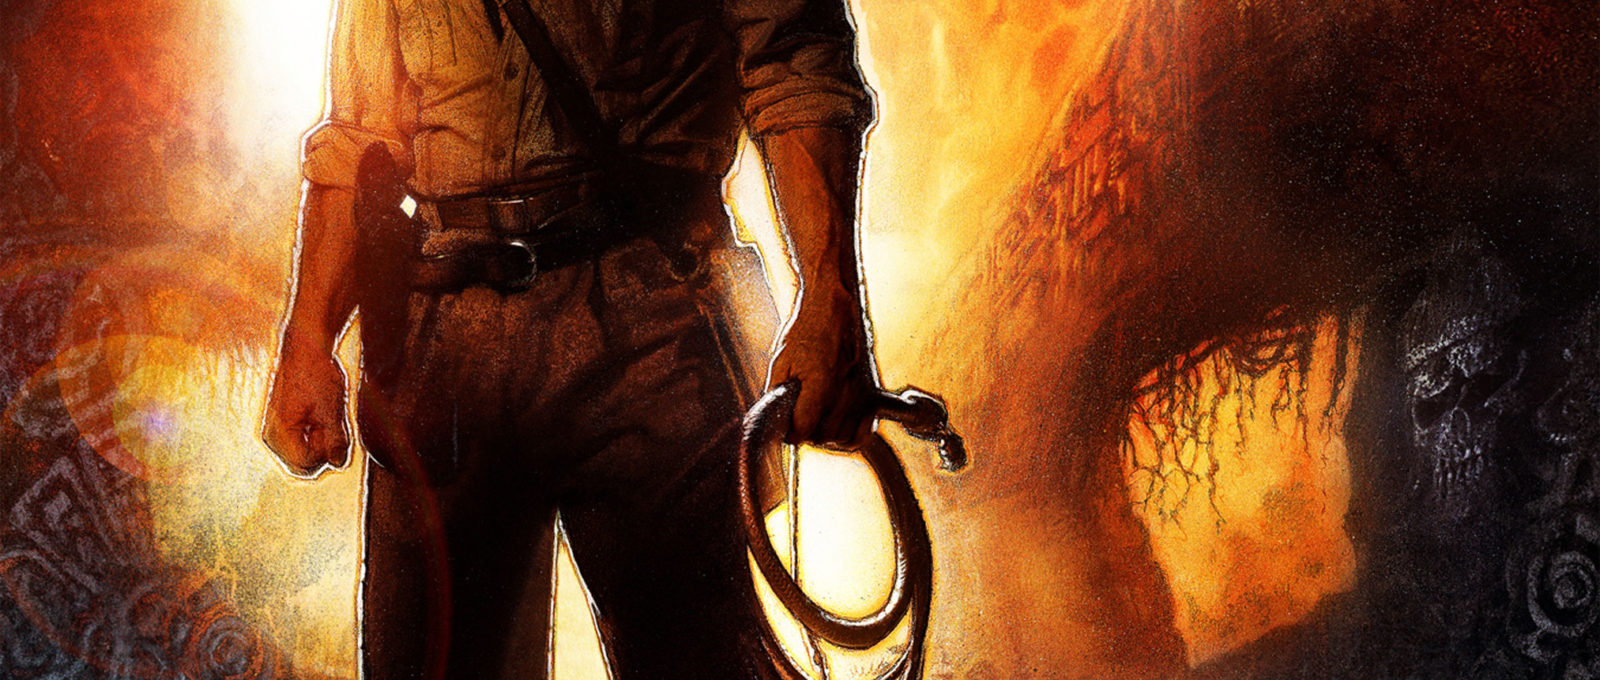 Indiana Jones and the Kingdom of the Crystal Skull movie poster